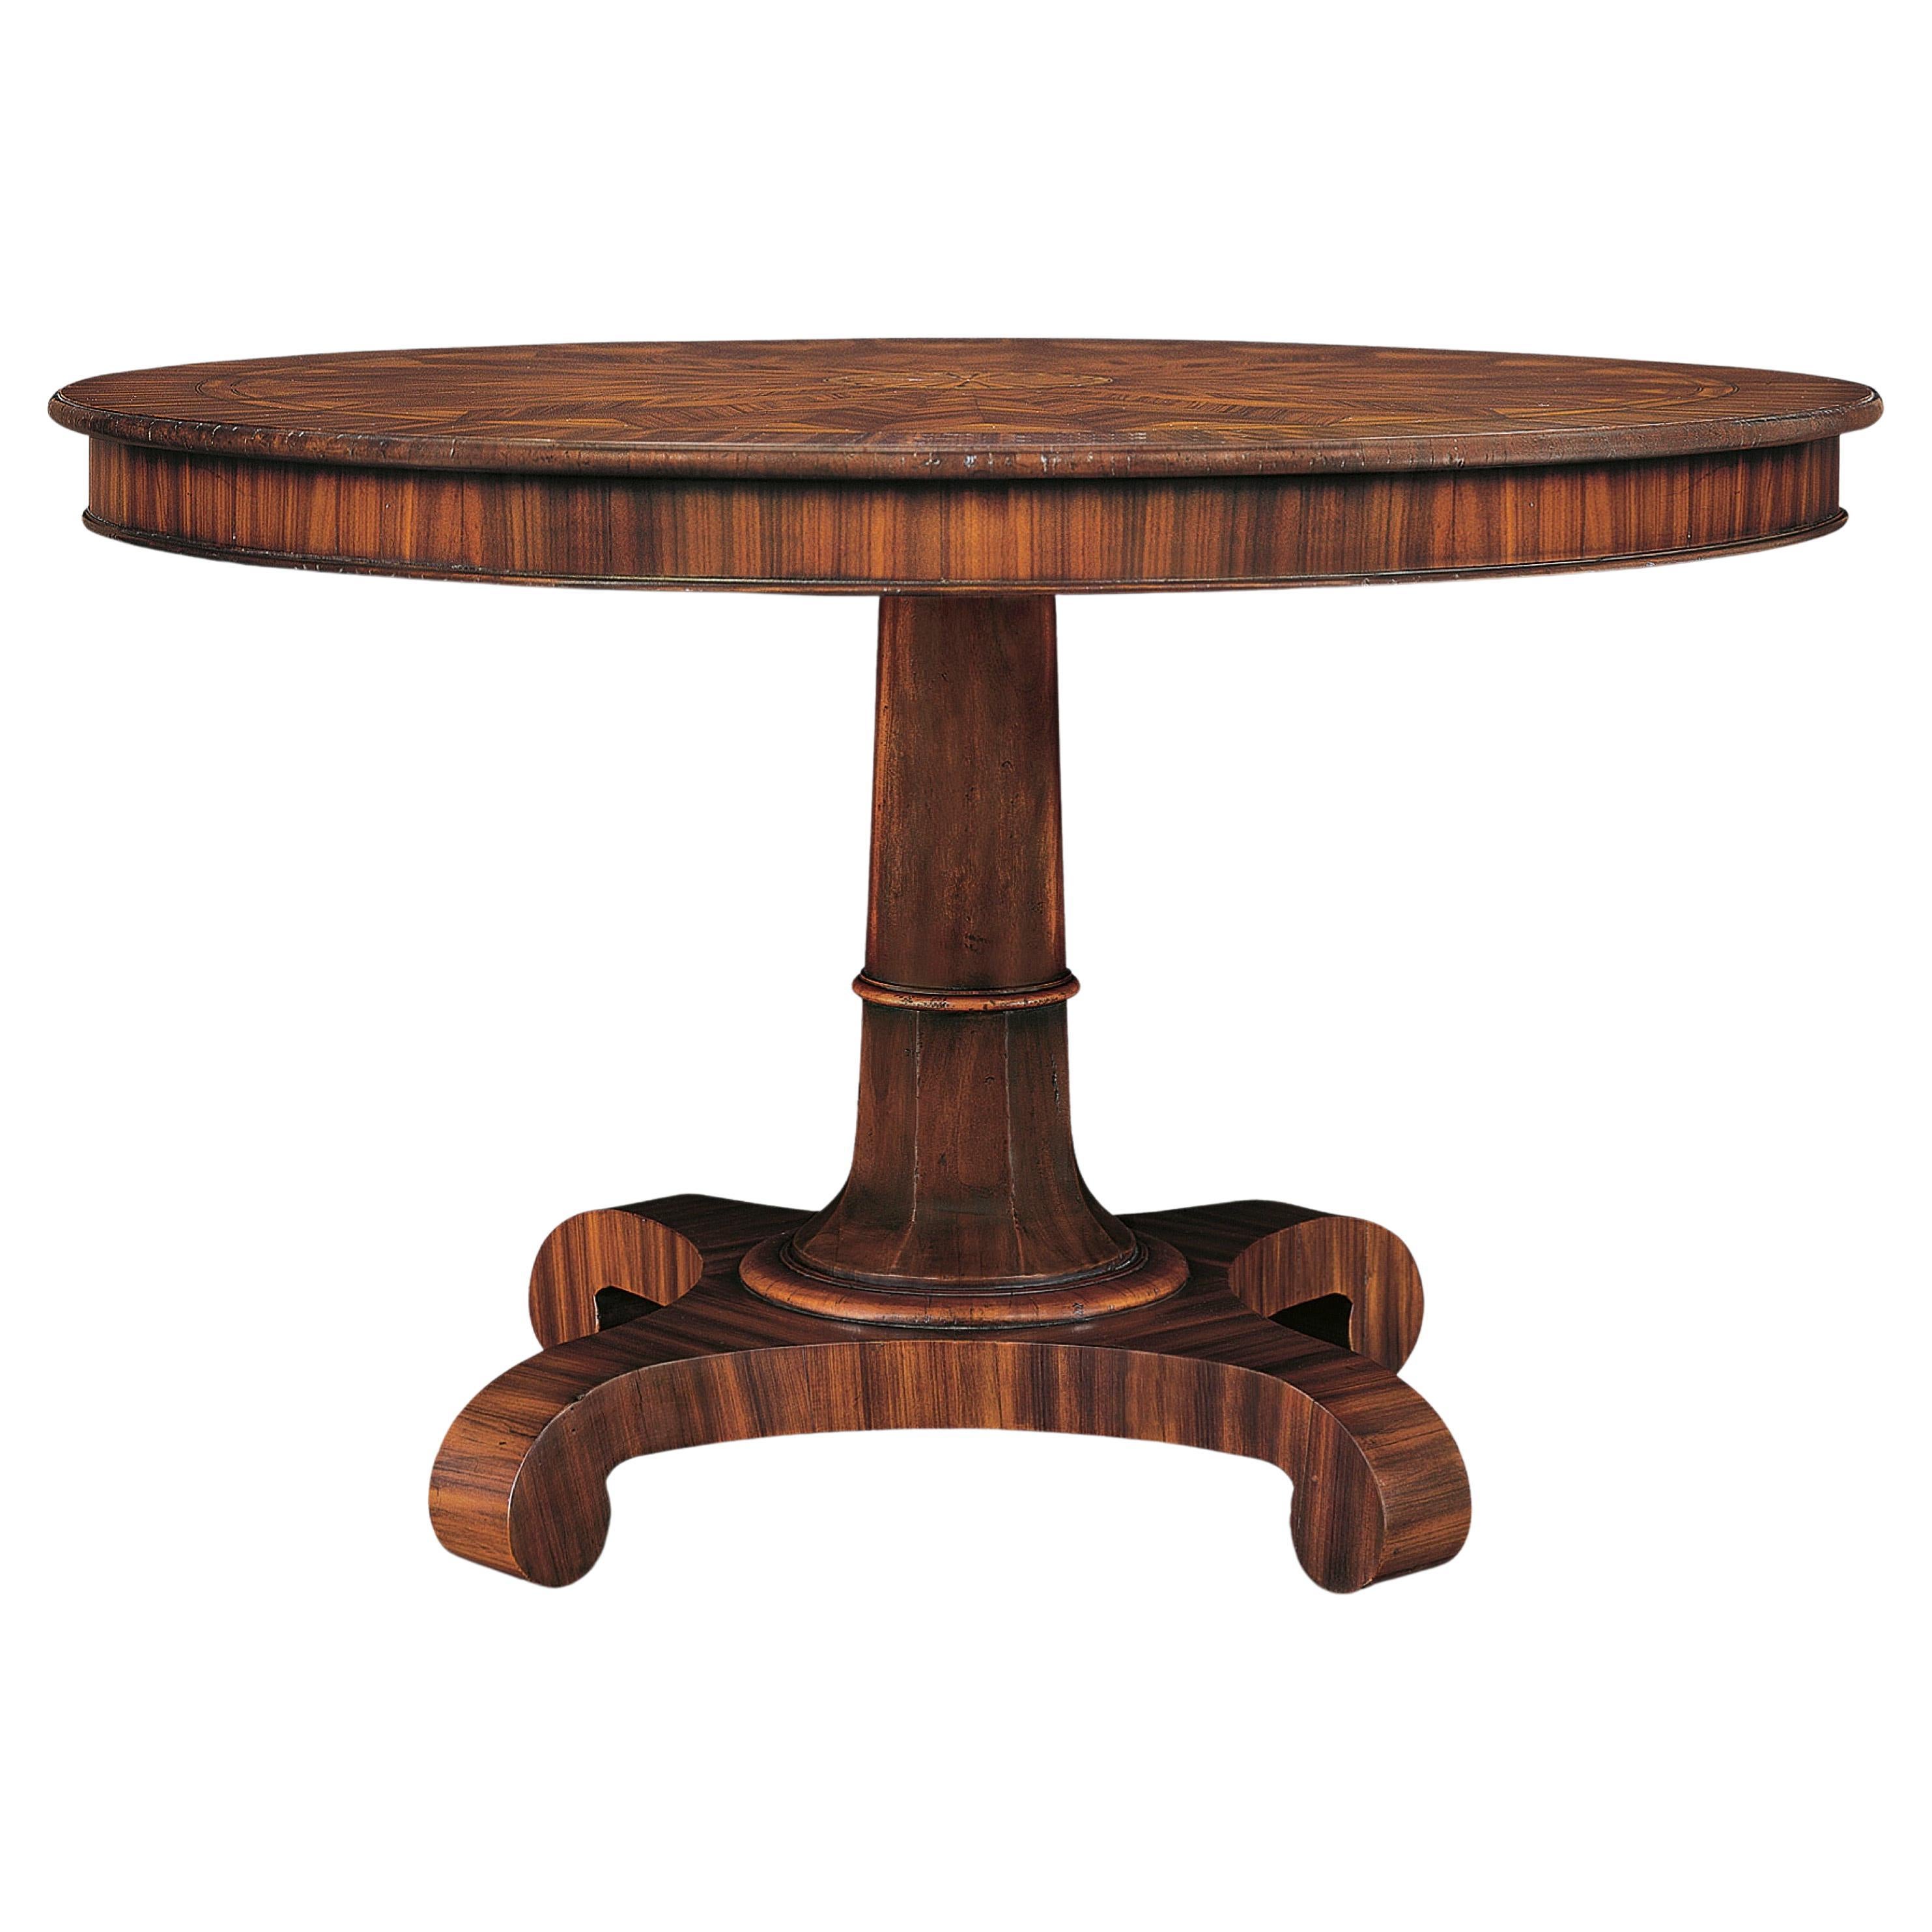 Mexican Neoclassic Table with pedestal & a star-shaped decoration on its top For Sale